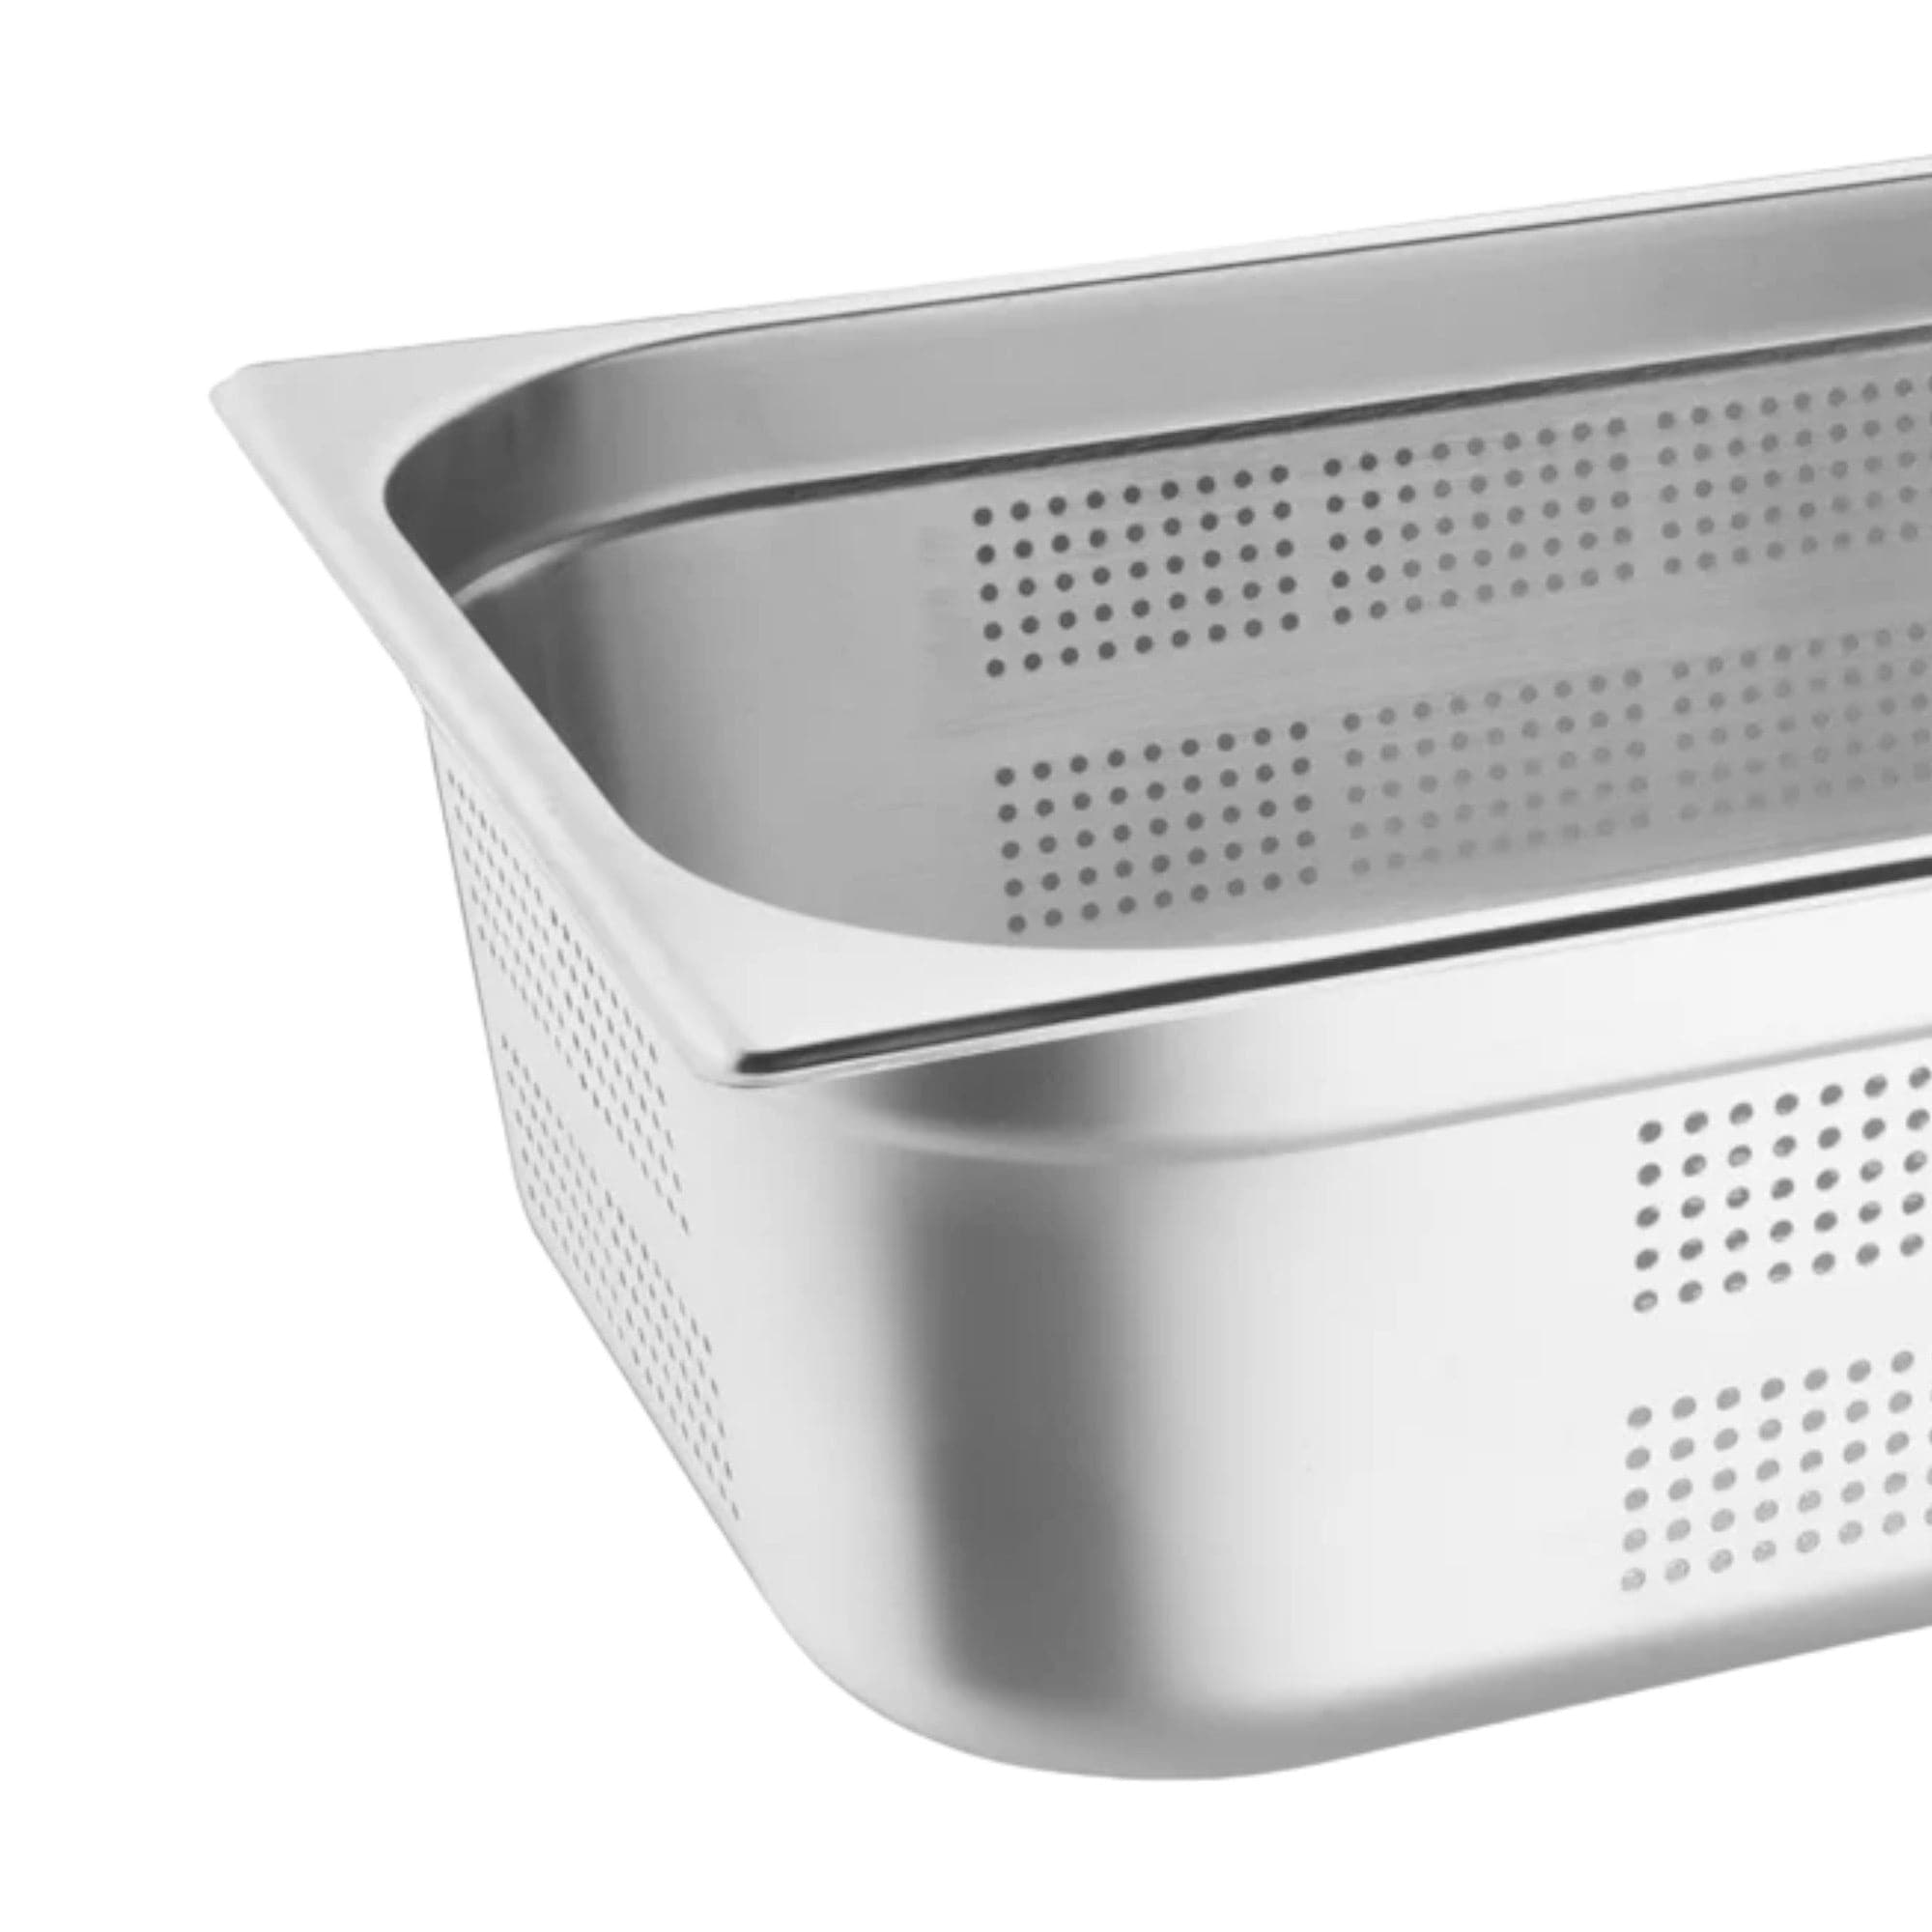 Eson - Stainless Steel Perforated Gastronorm Tray 150mm